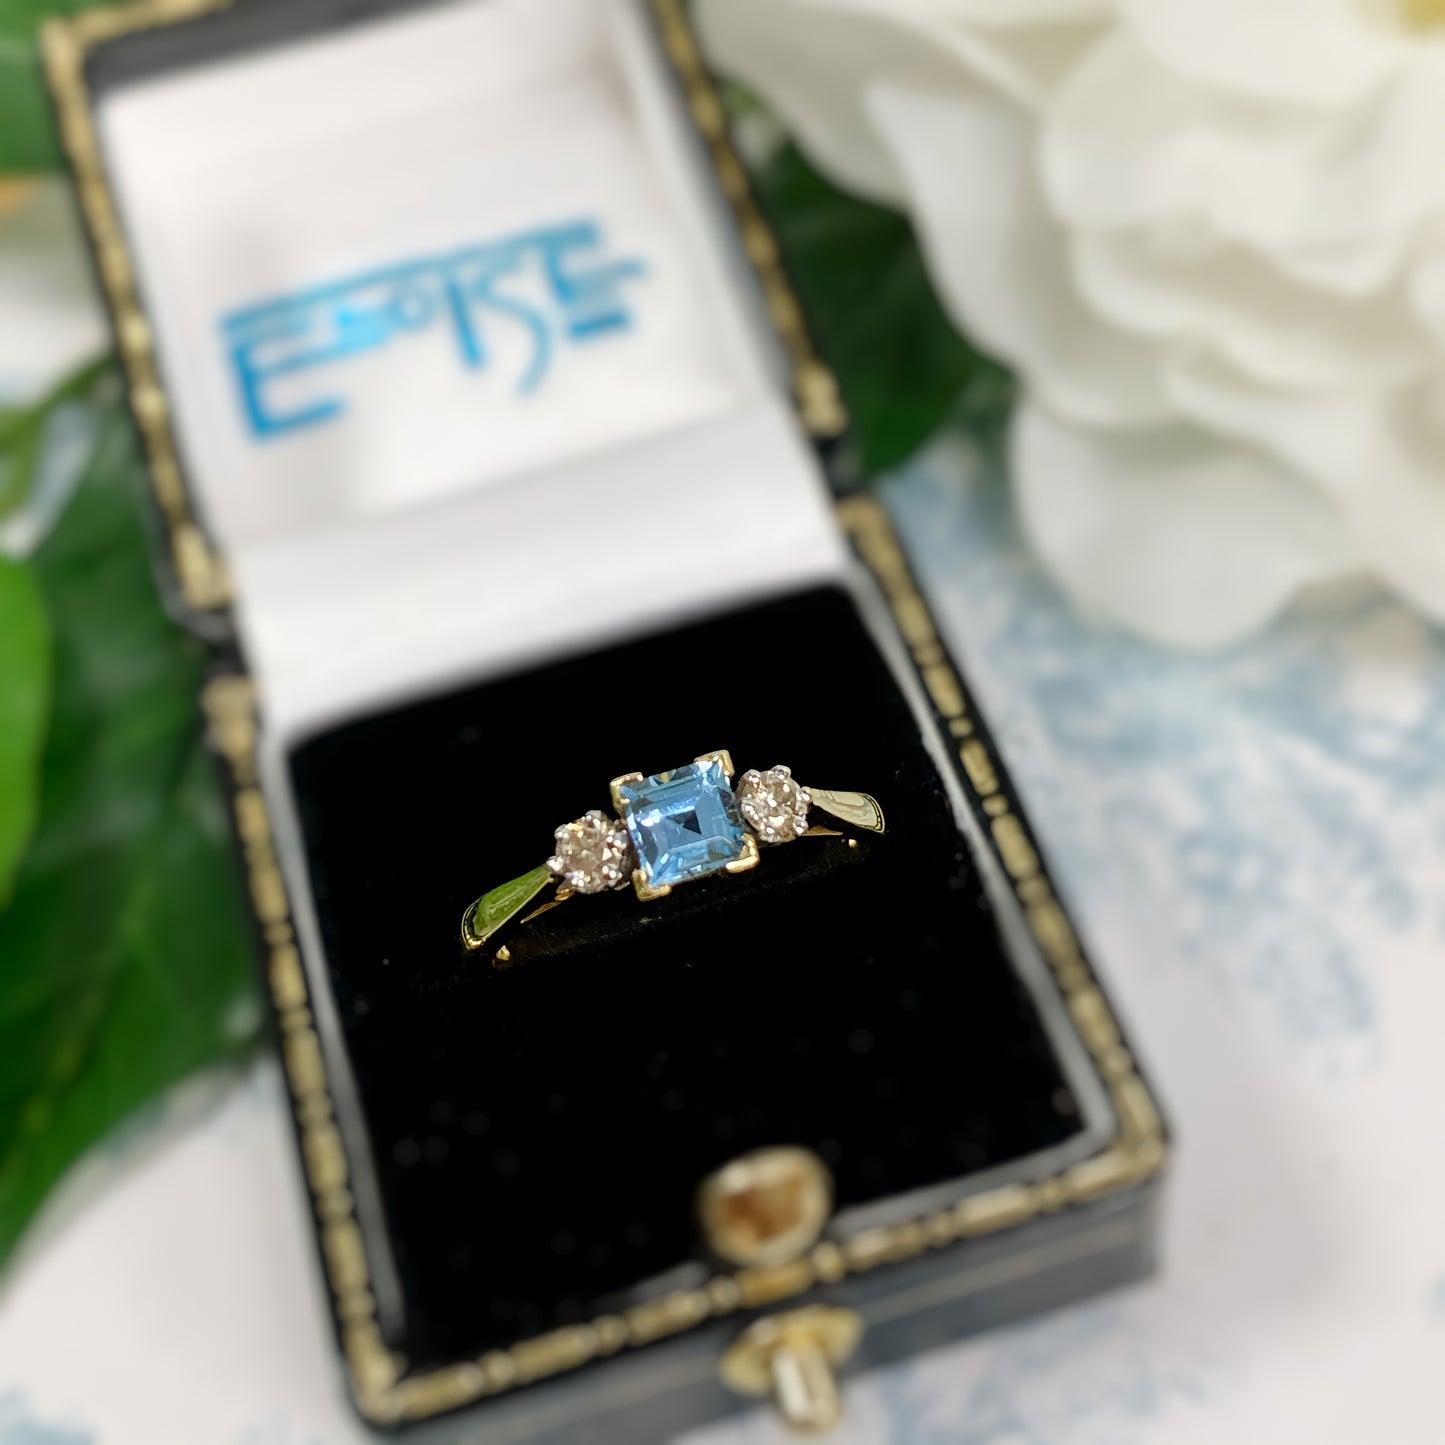 18ct Yellow Gold Vintage Reproduction Blue Topaz and Diamond Ring – Size M 1/2